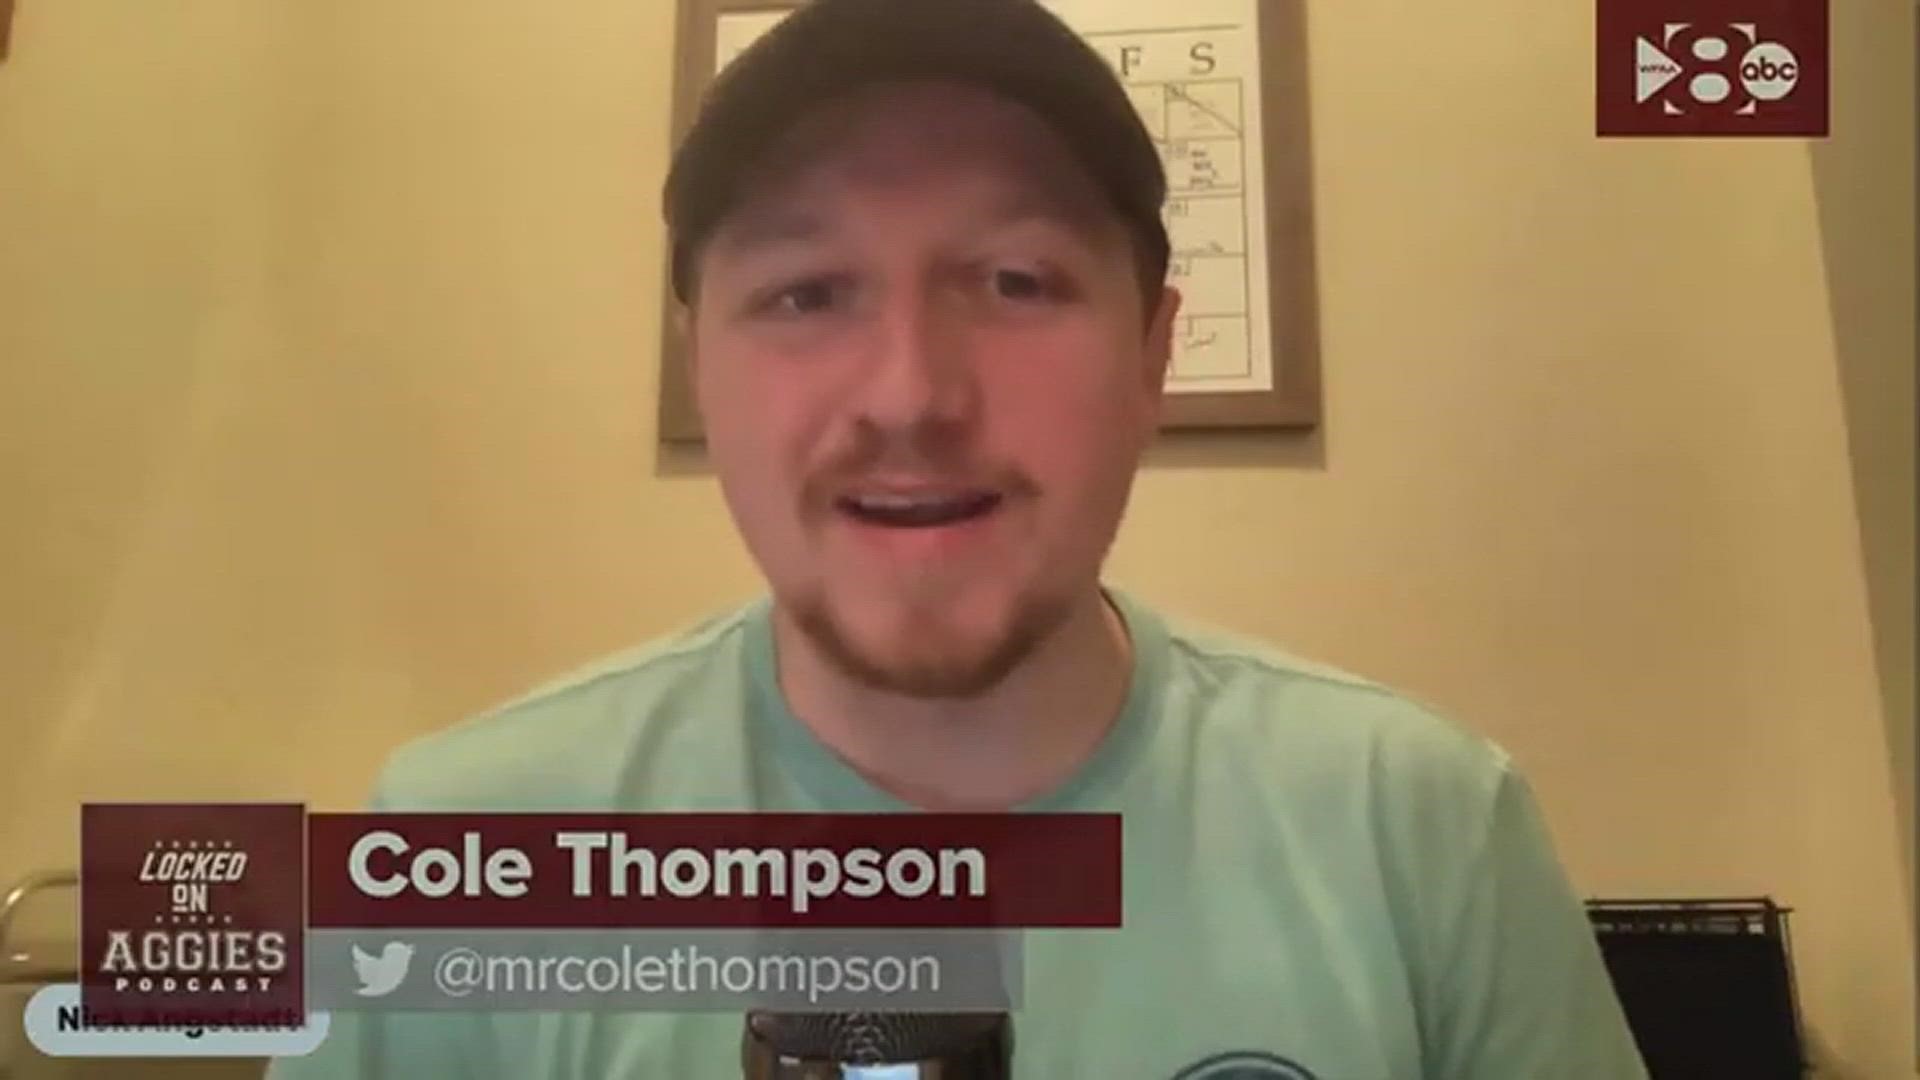 Join Locked on Aggies Host Cole Thompson as he breaks down the new scenario with a 12 team playoff for college football and how it can affect Texas A&M.